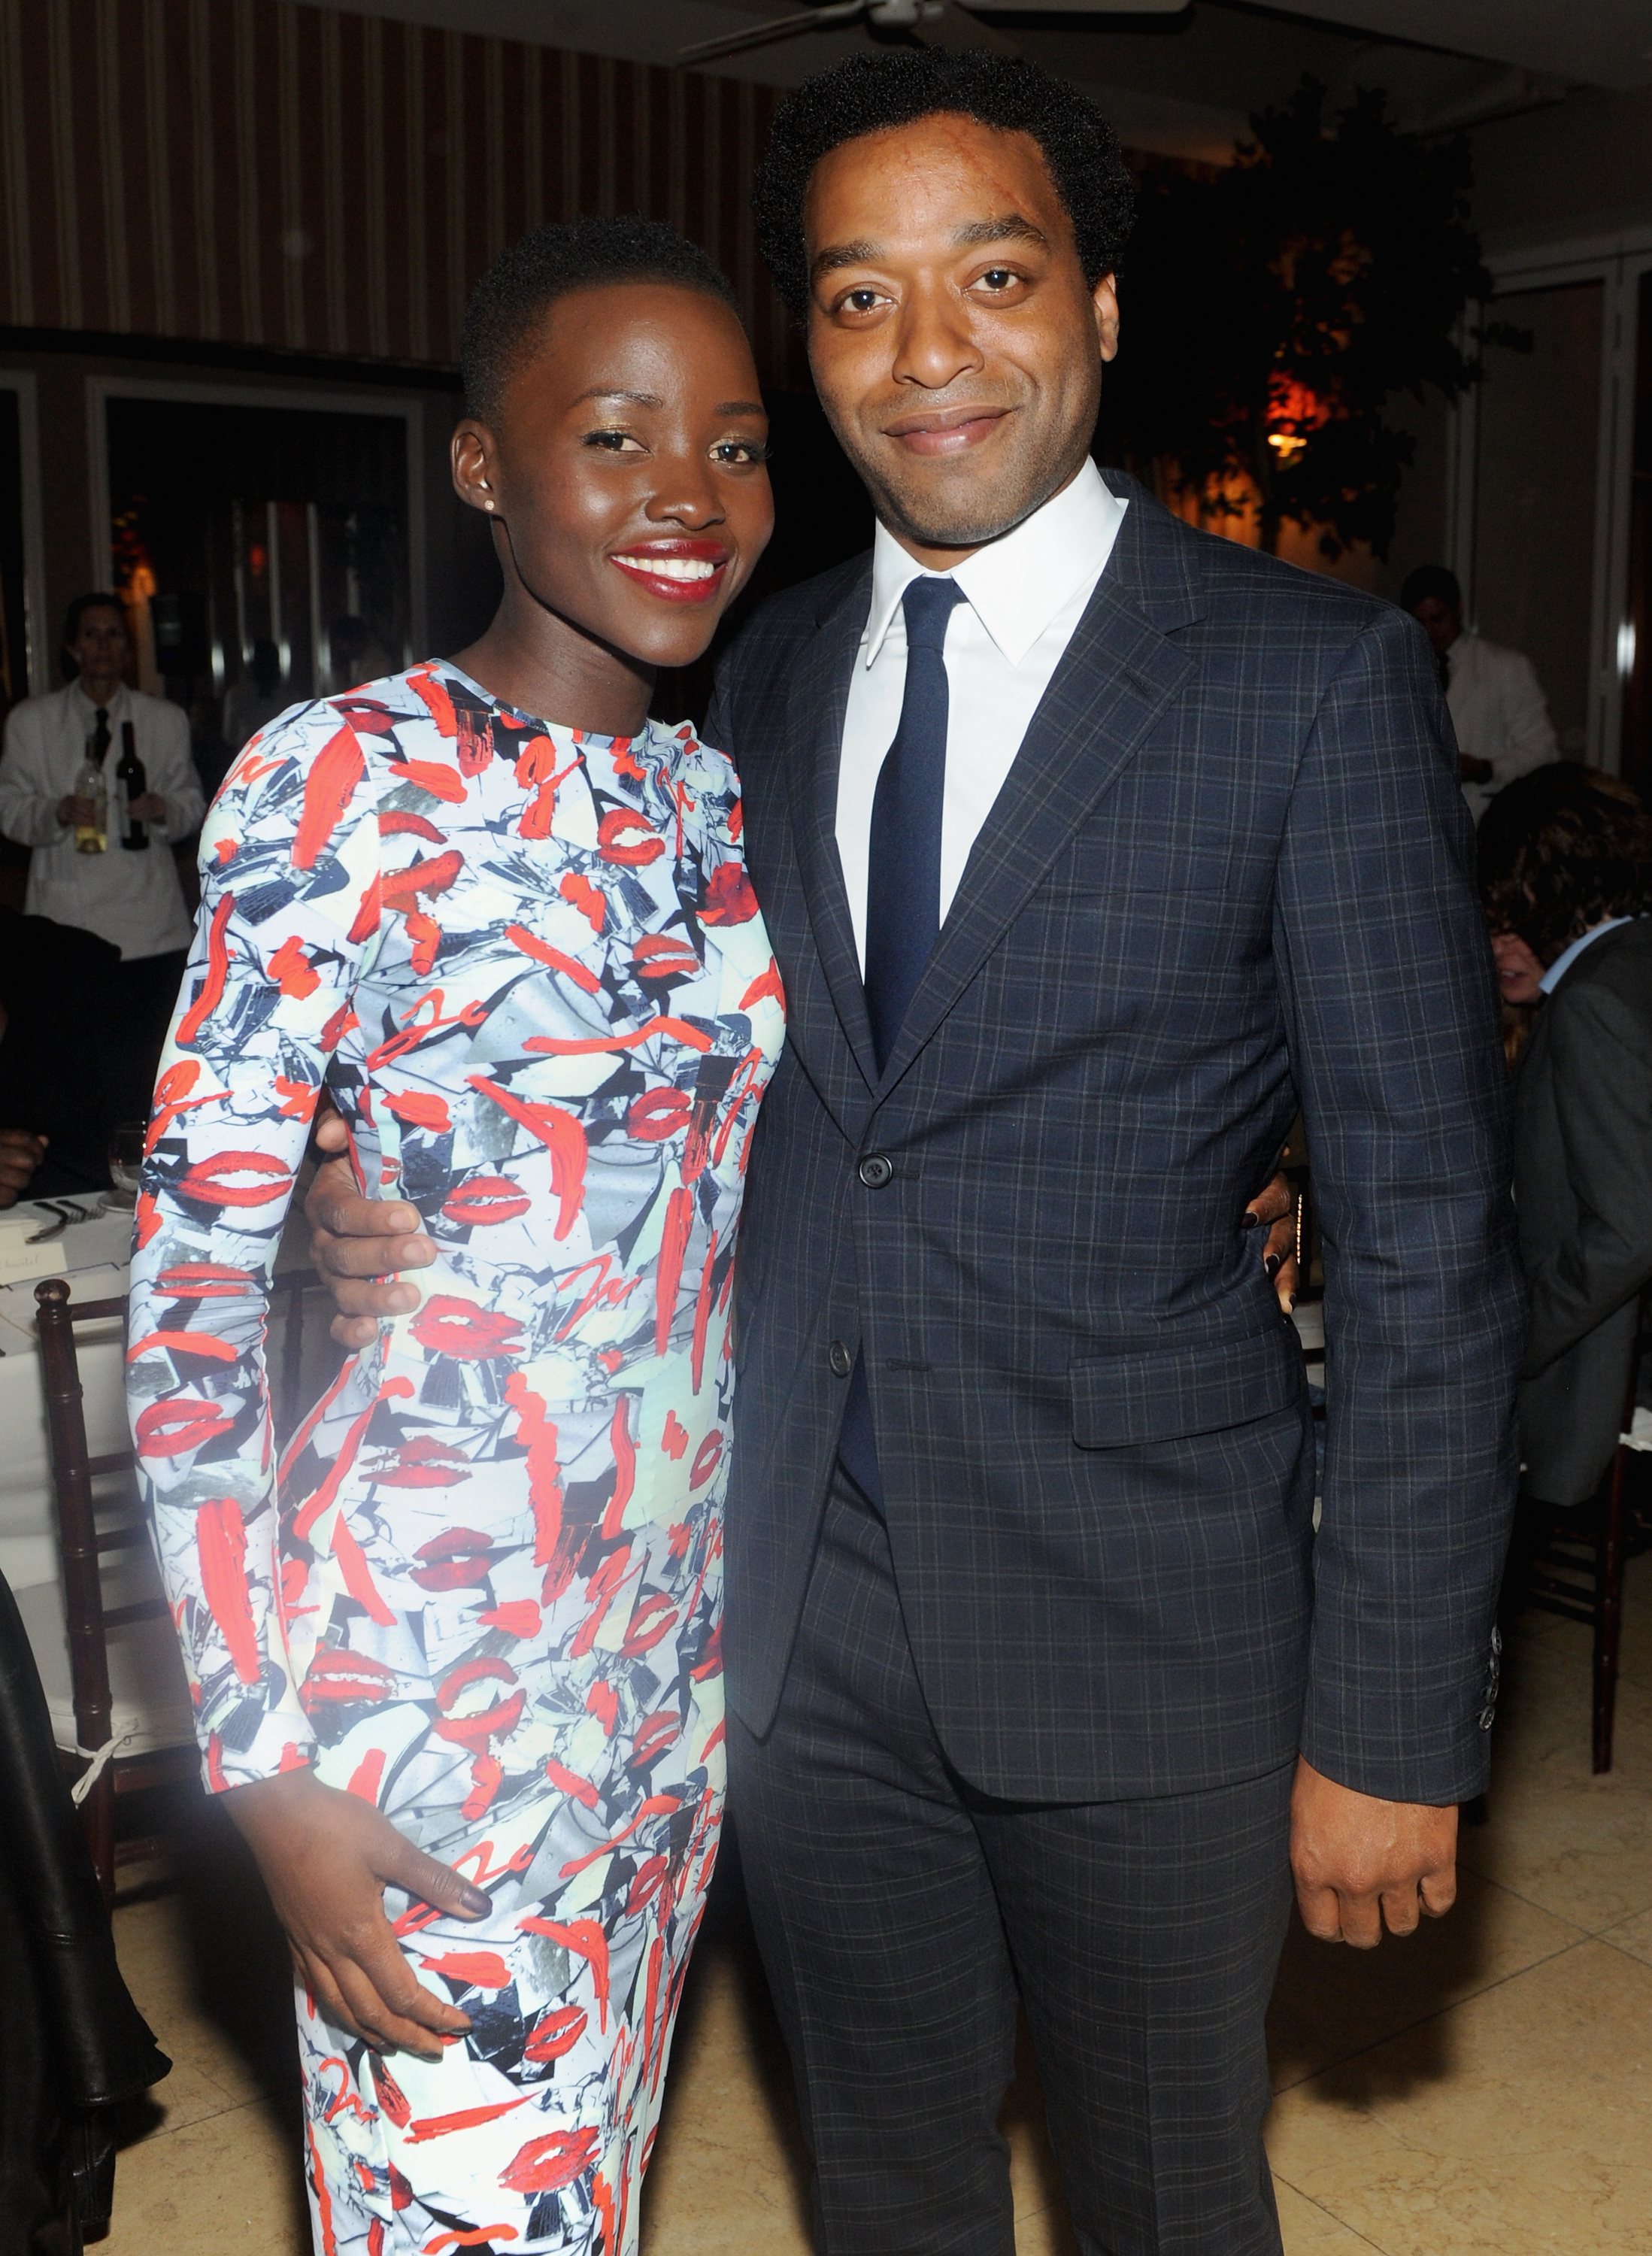 Actors Lupita Nyong'o (L) and Chiwetel Ejiofor - GREY GOOSE Presents "12 Years A Slave" Dinner